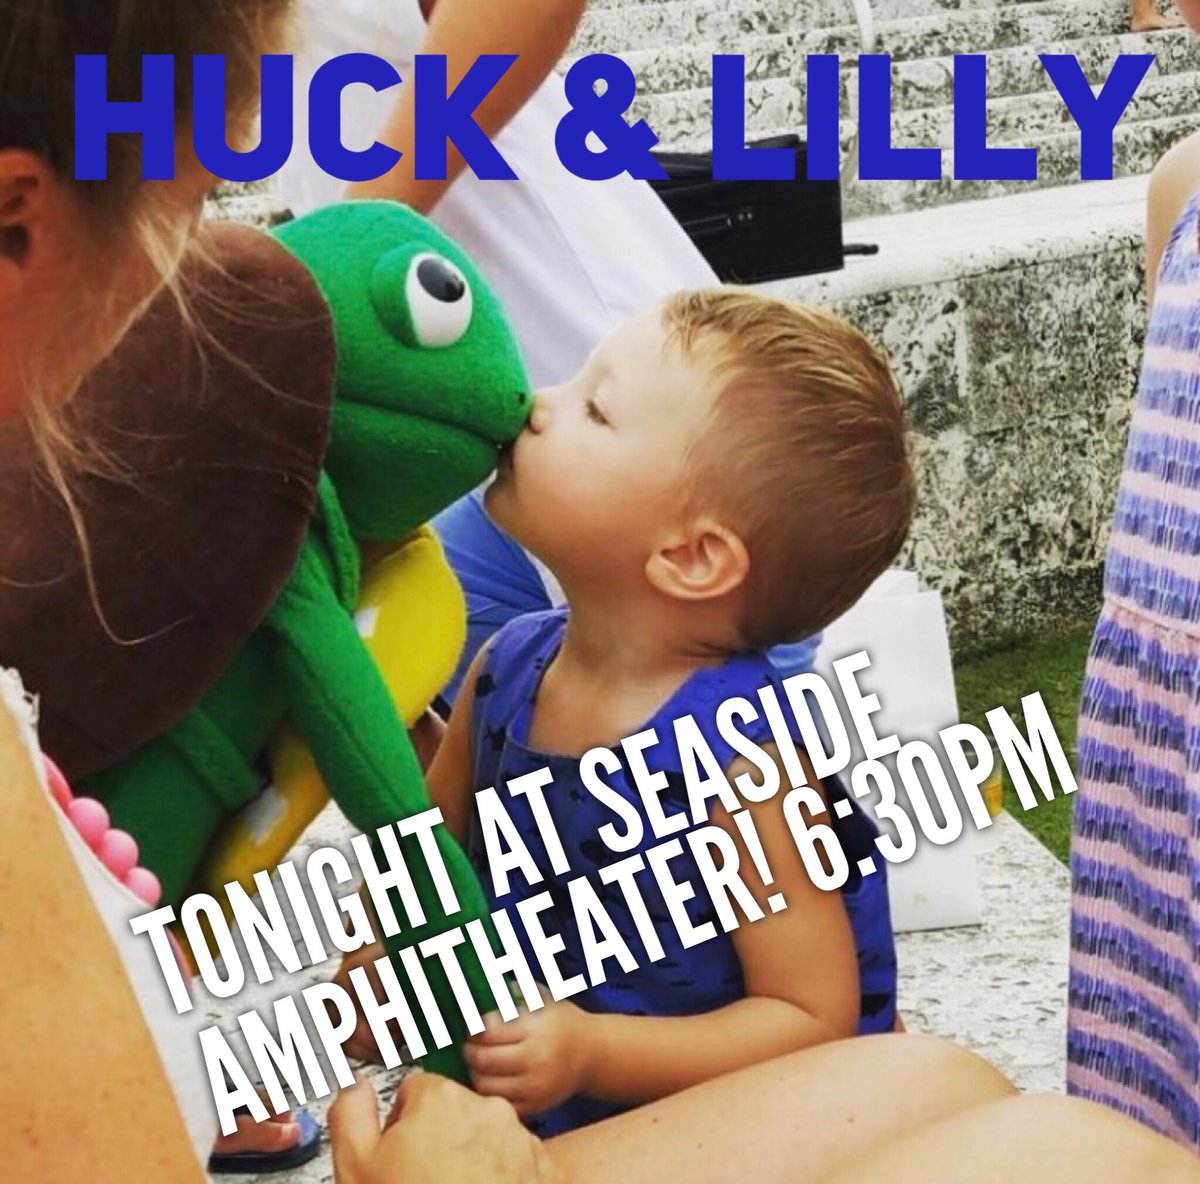 Catch Huck & Lilly TONIGHT  at #SeasideAmphitheater! 6:30pm...Our thoughts and prayers are with Texas❤️ @SeasideFL_